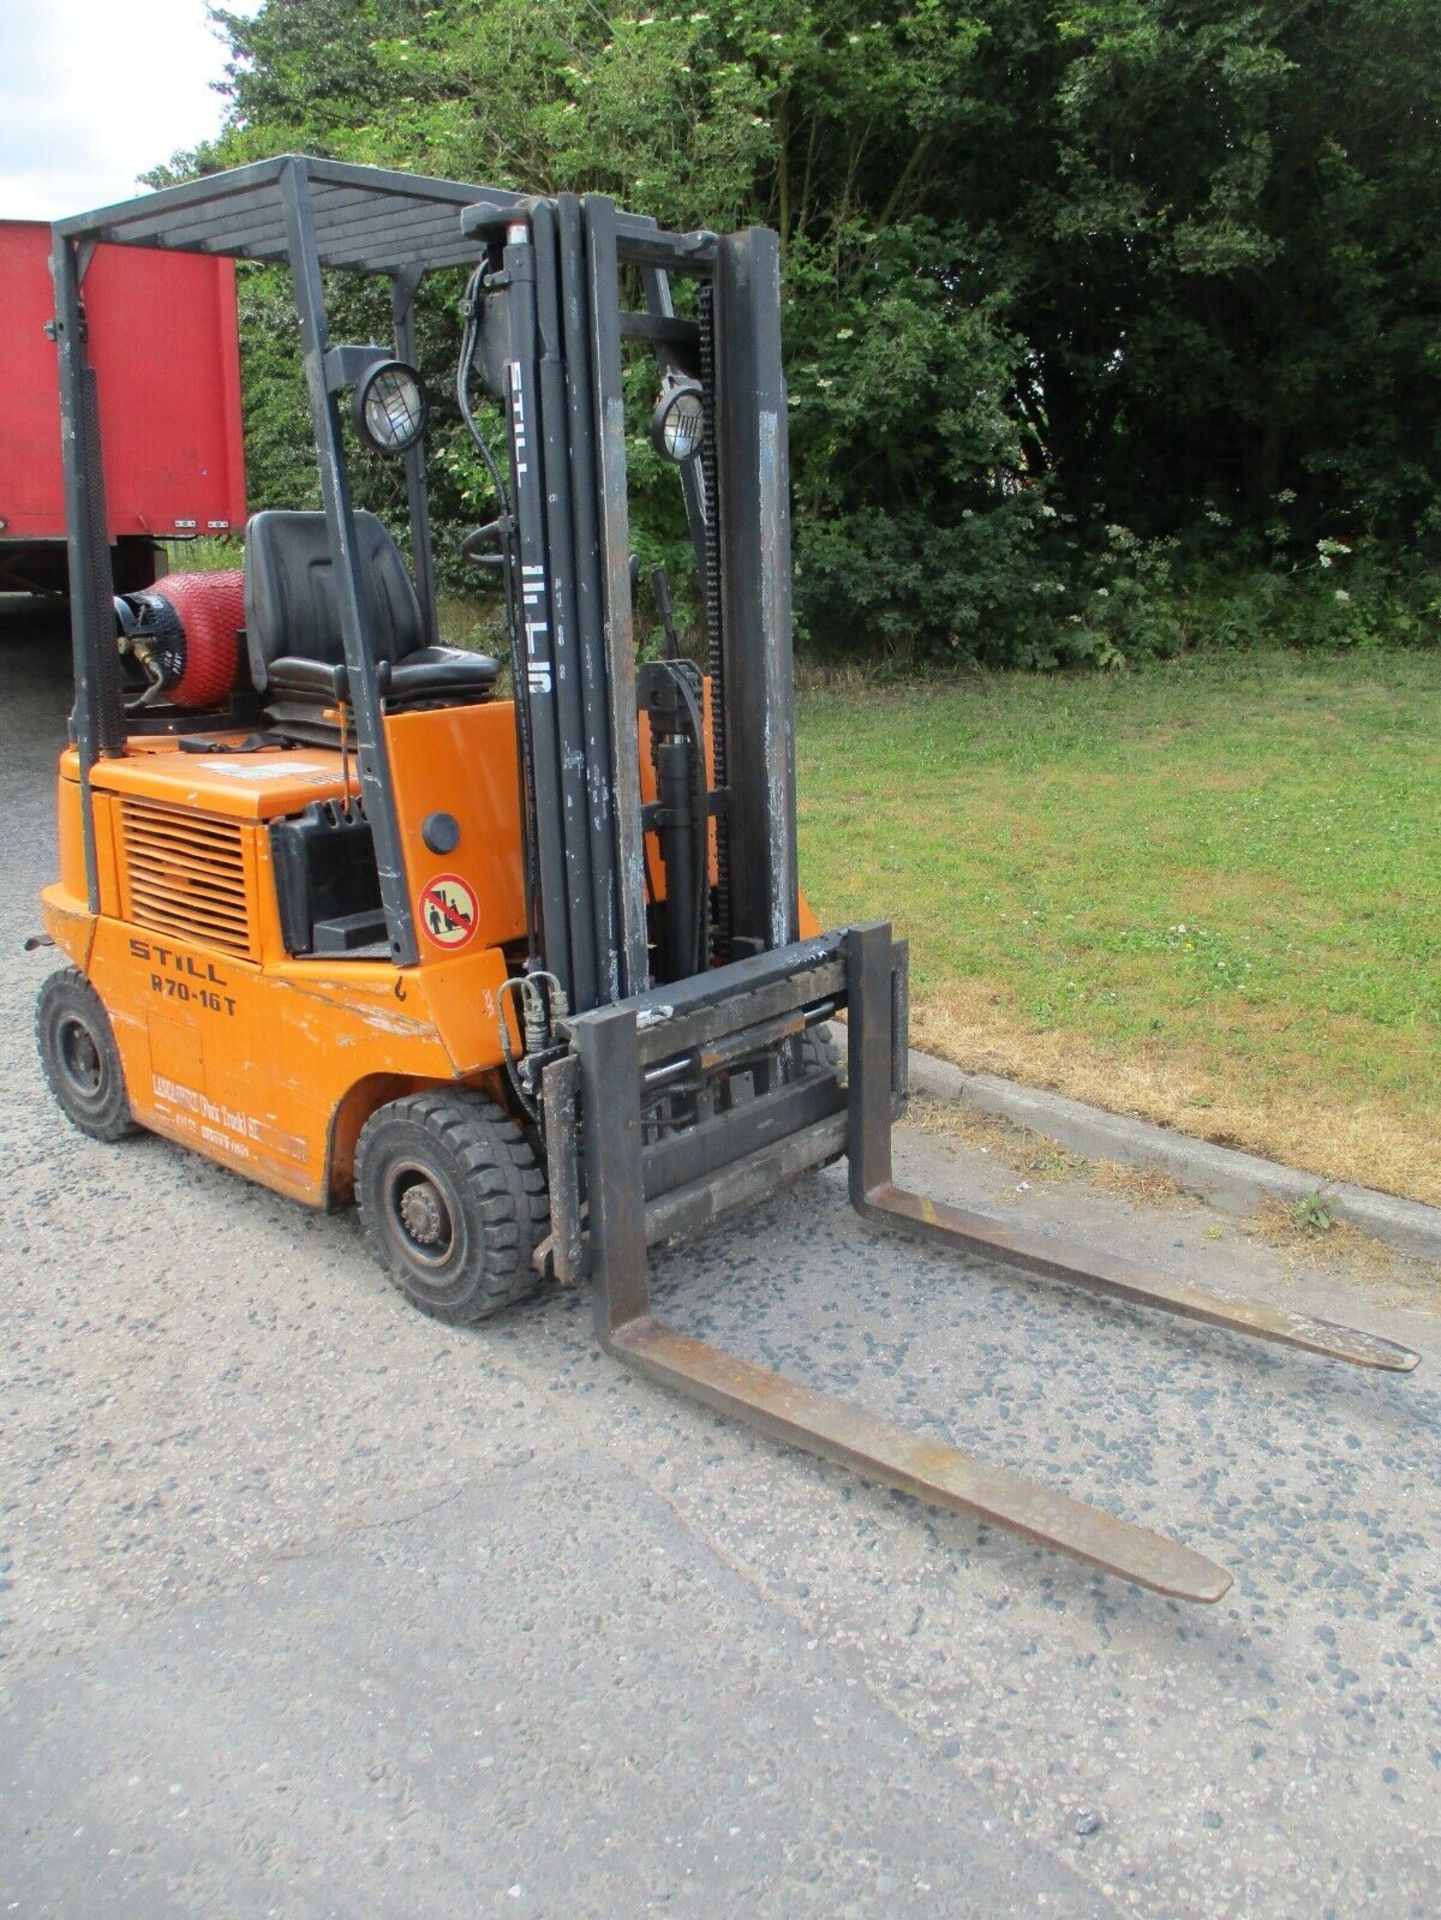 STILL R70-16T FORK LIFT FORKLIFT TRUCK STACKER CONTAINER SPEC TRIPLE MAST - Image 5 of 12